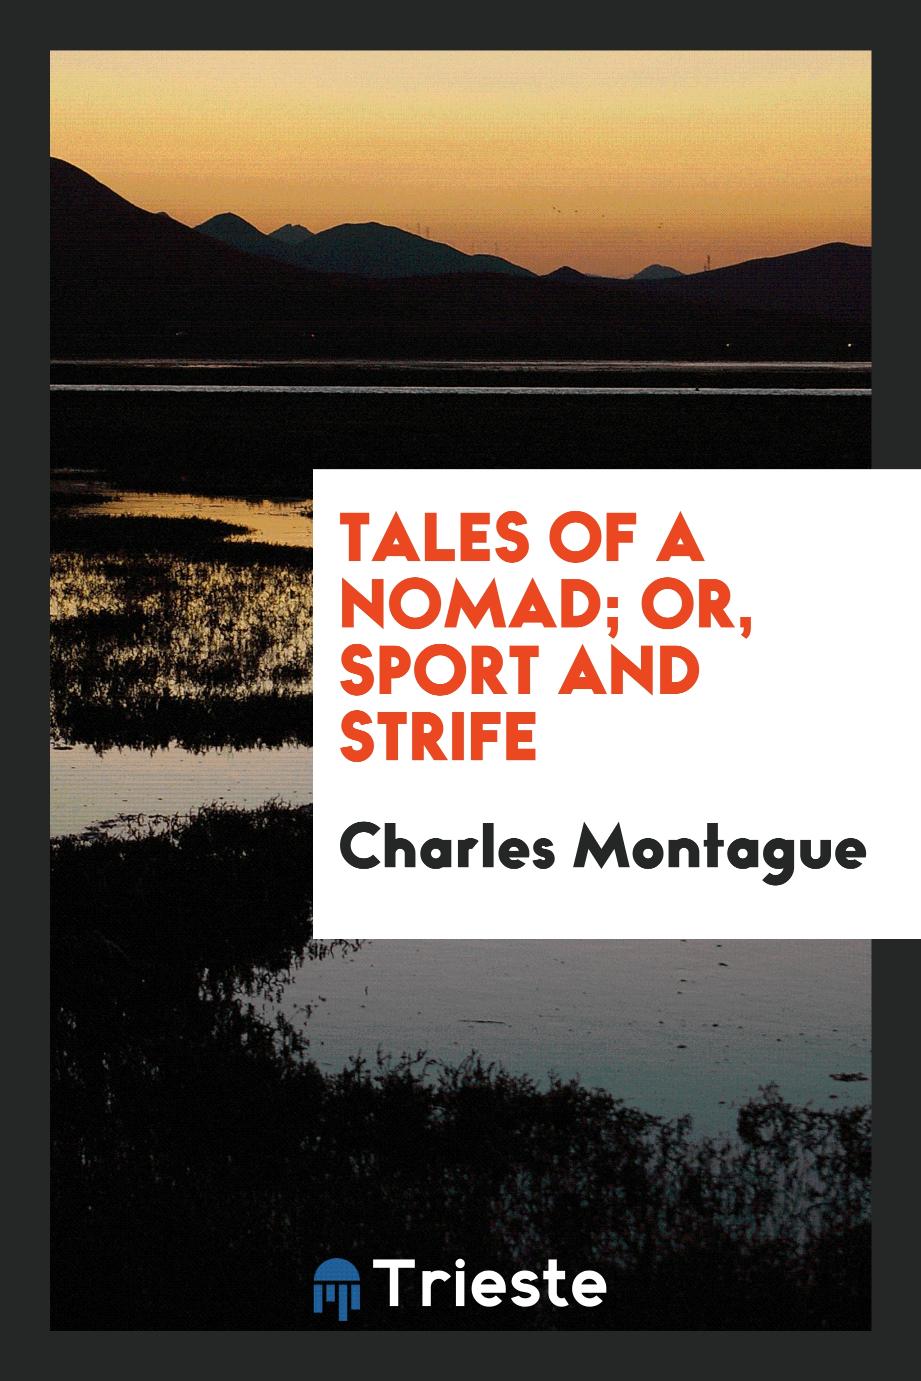 Tales of a nomad; or, Sport and strife